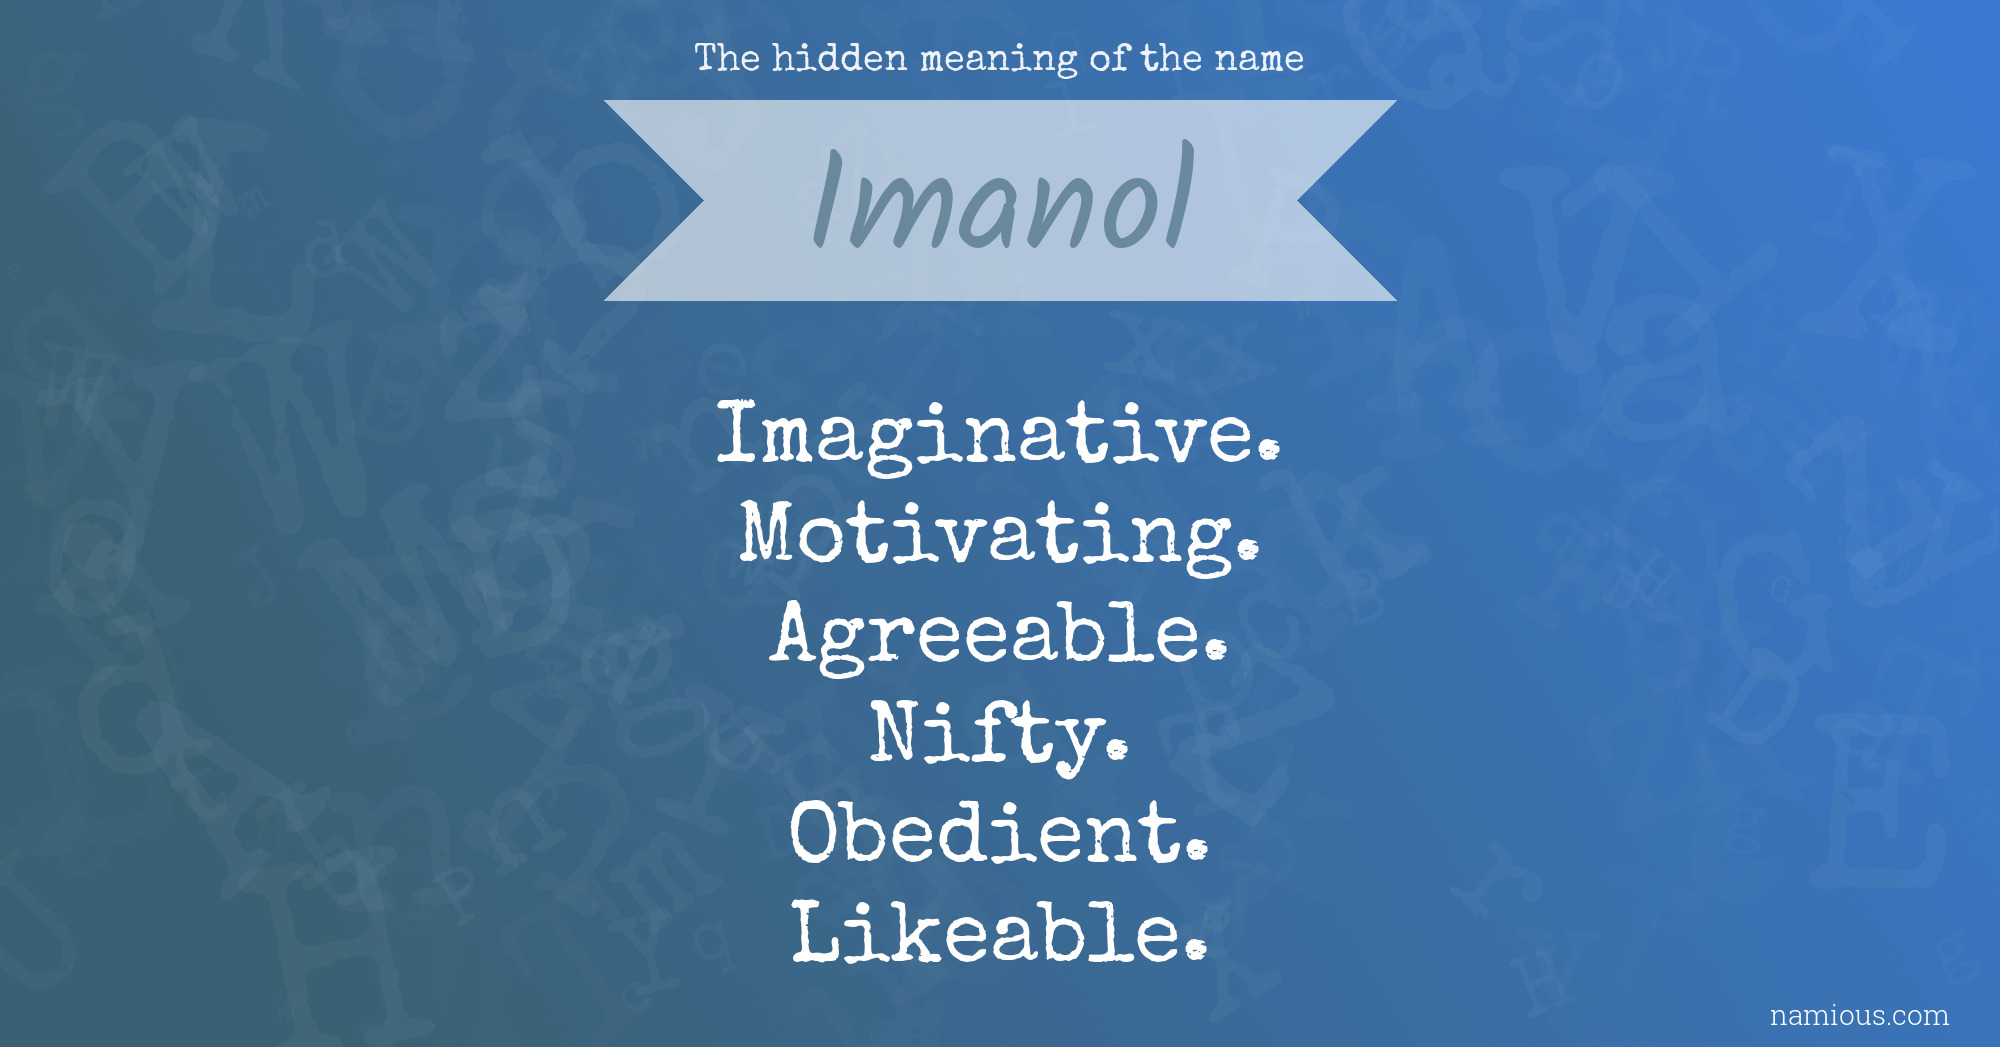 The hidden meaning of the name Imanol